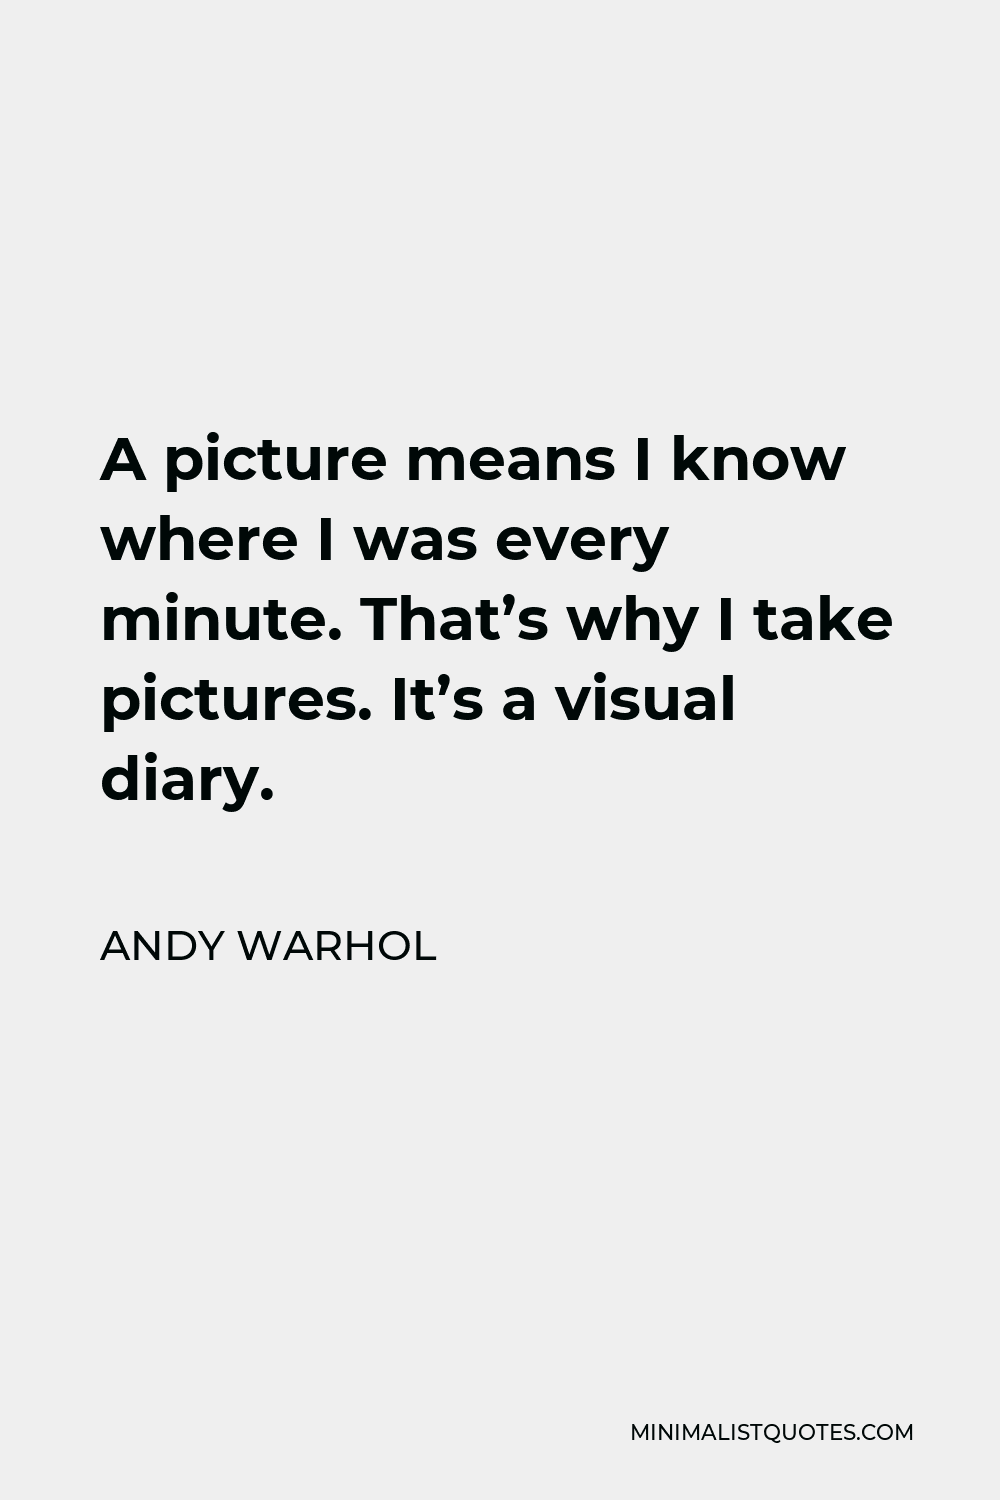 Andy Warhol Quote - A picture means I know where I was every minute. That’s why I take pictures. It’s a visual diary.